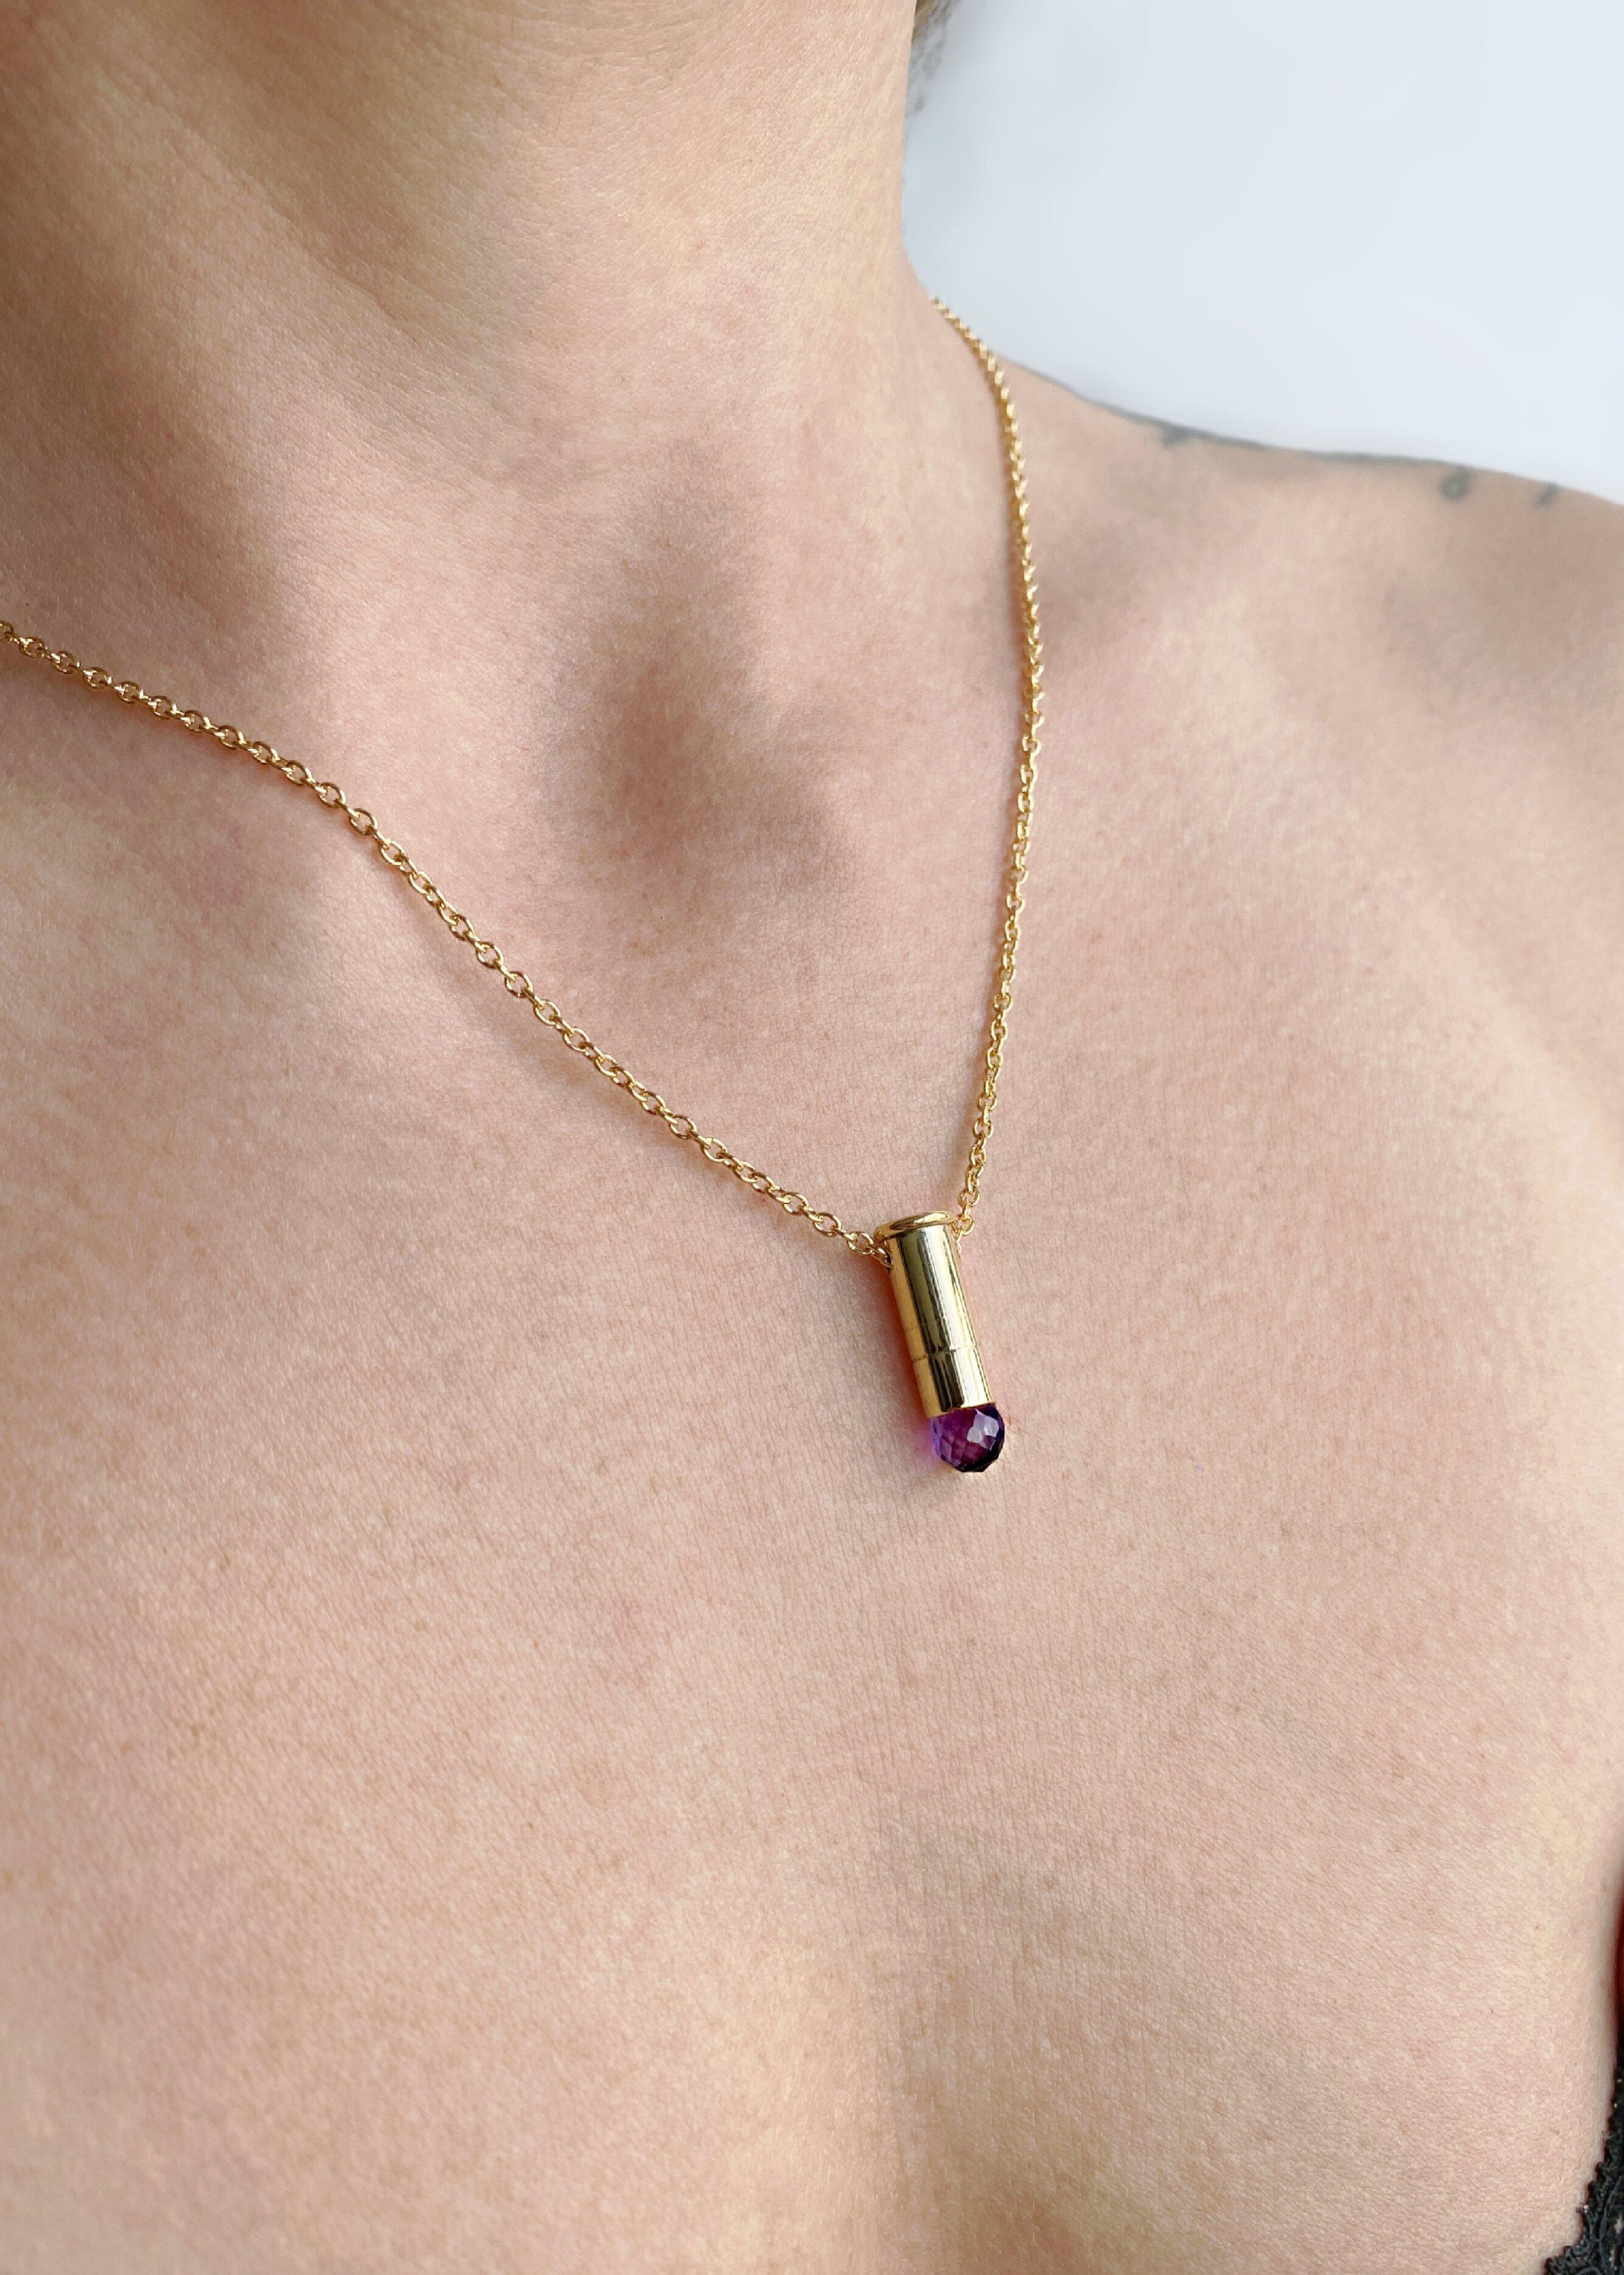 This captivating necklace features a 22 caliber gold filled bullet casket set with a natural Amethyst briolette. This piece is from the “Peace” collection by Sebastian Jaramillo, commemorating the signing of peace between the Colombian guerrillas